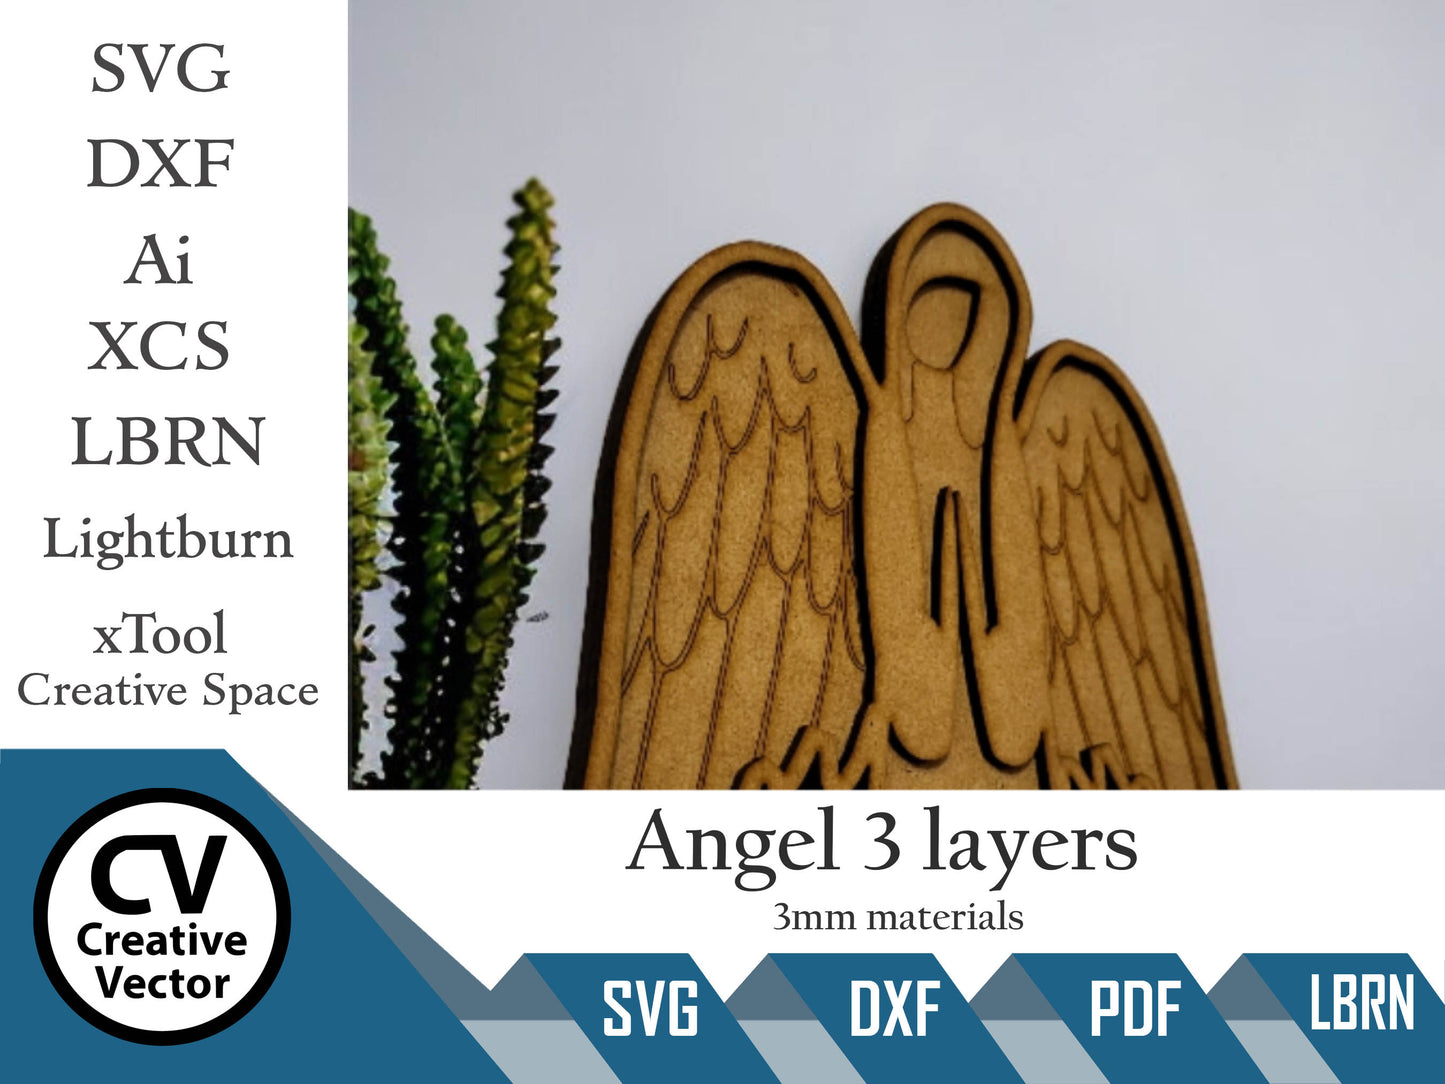 Angel 3 layers standing vol3